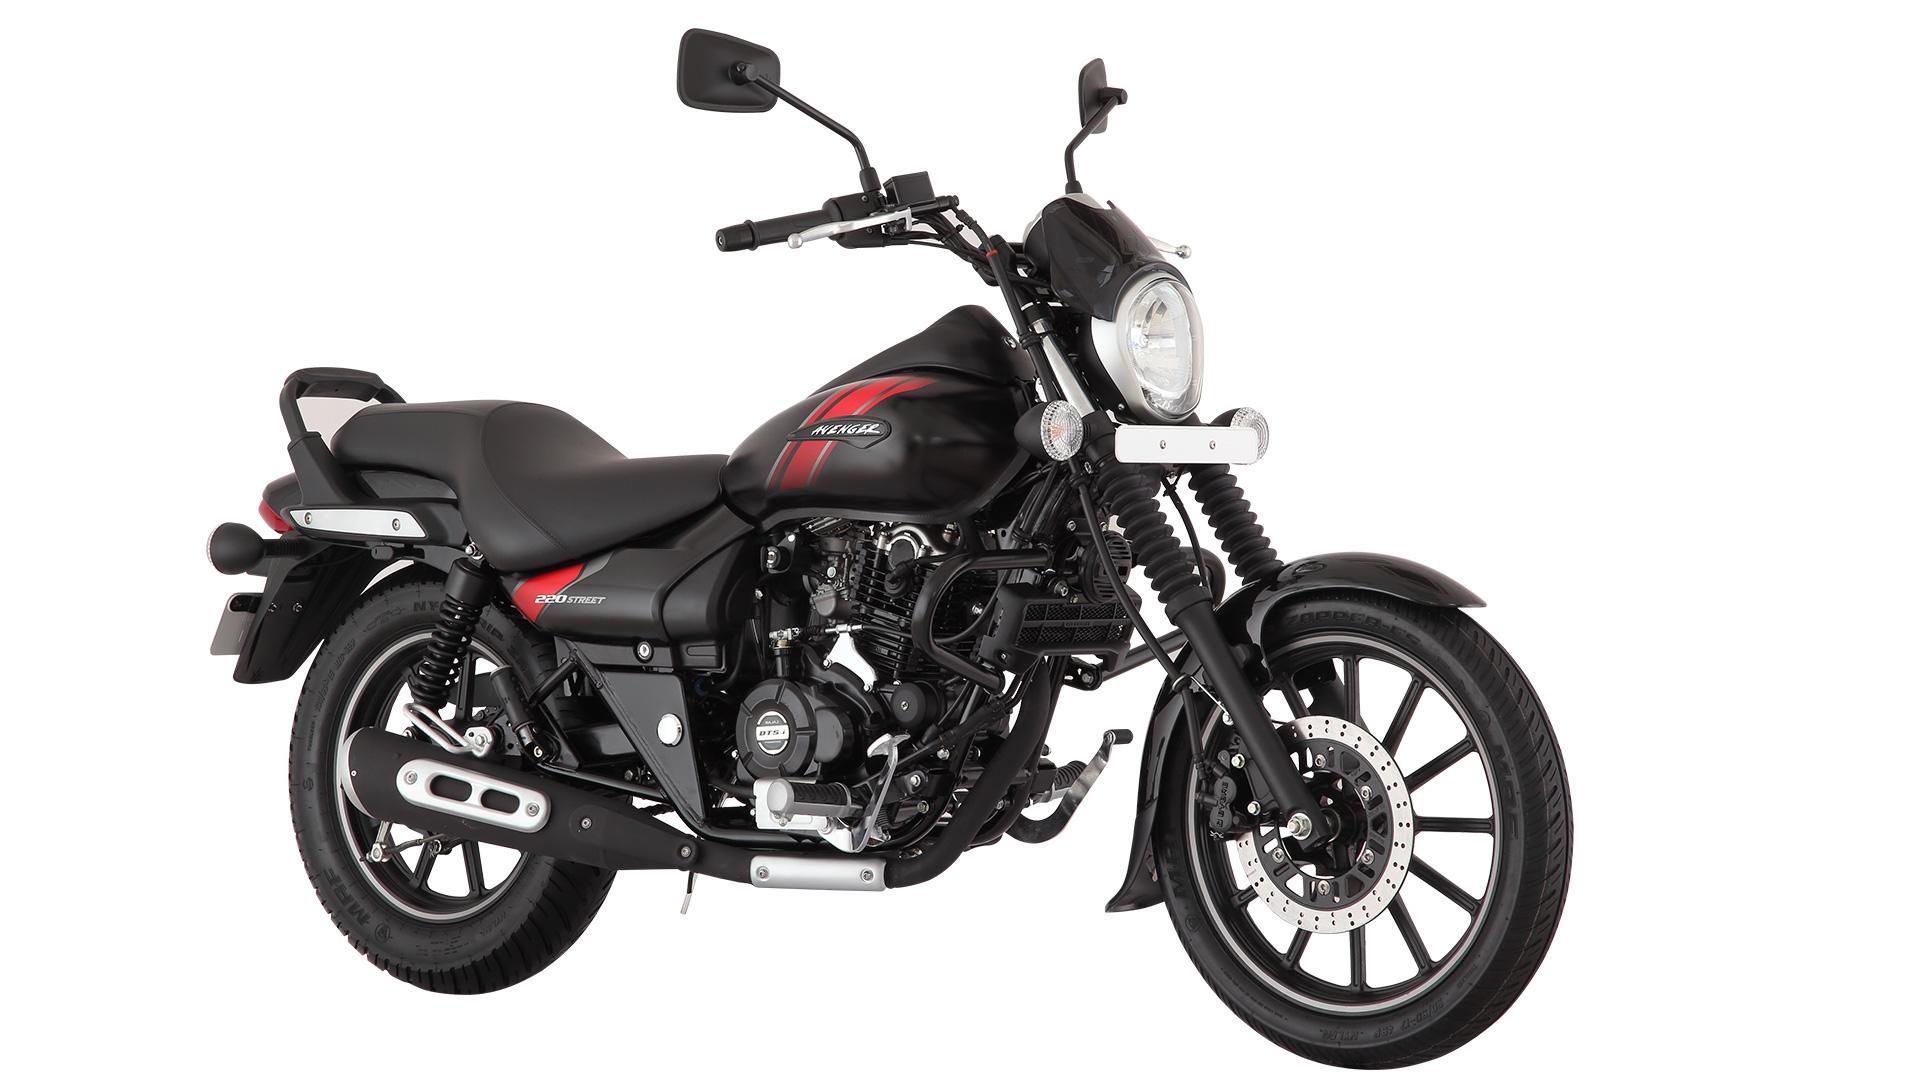 Bajaj Avenger Street 160 Price, Mileage, Specifications, Colors, Top Speed and Service Schedule